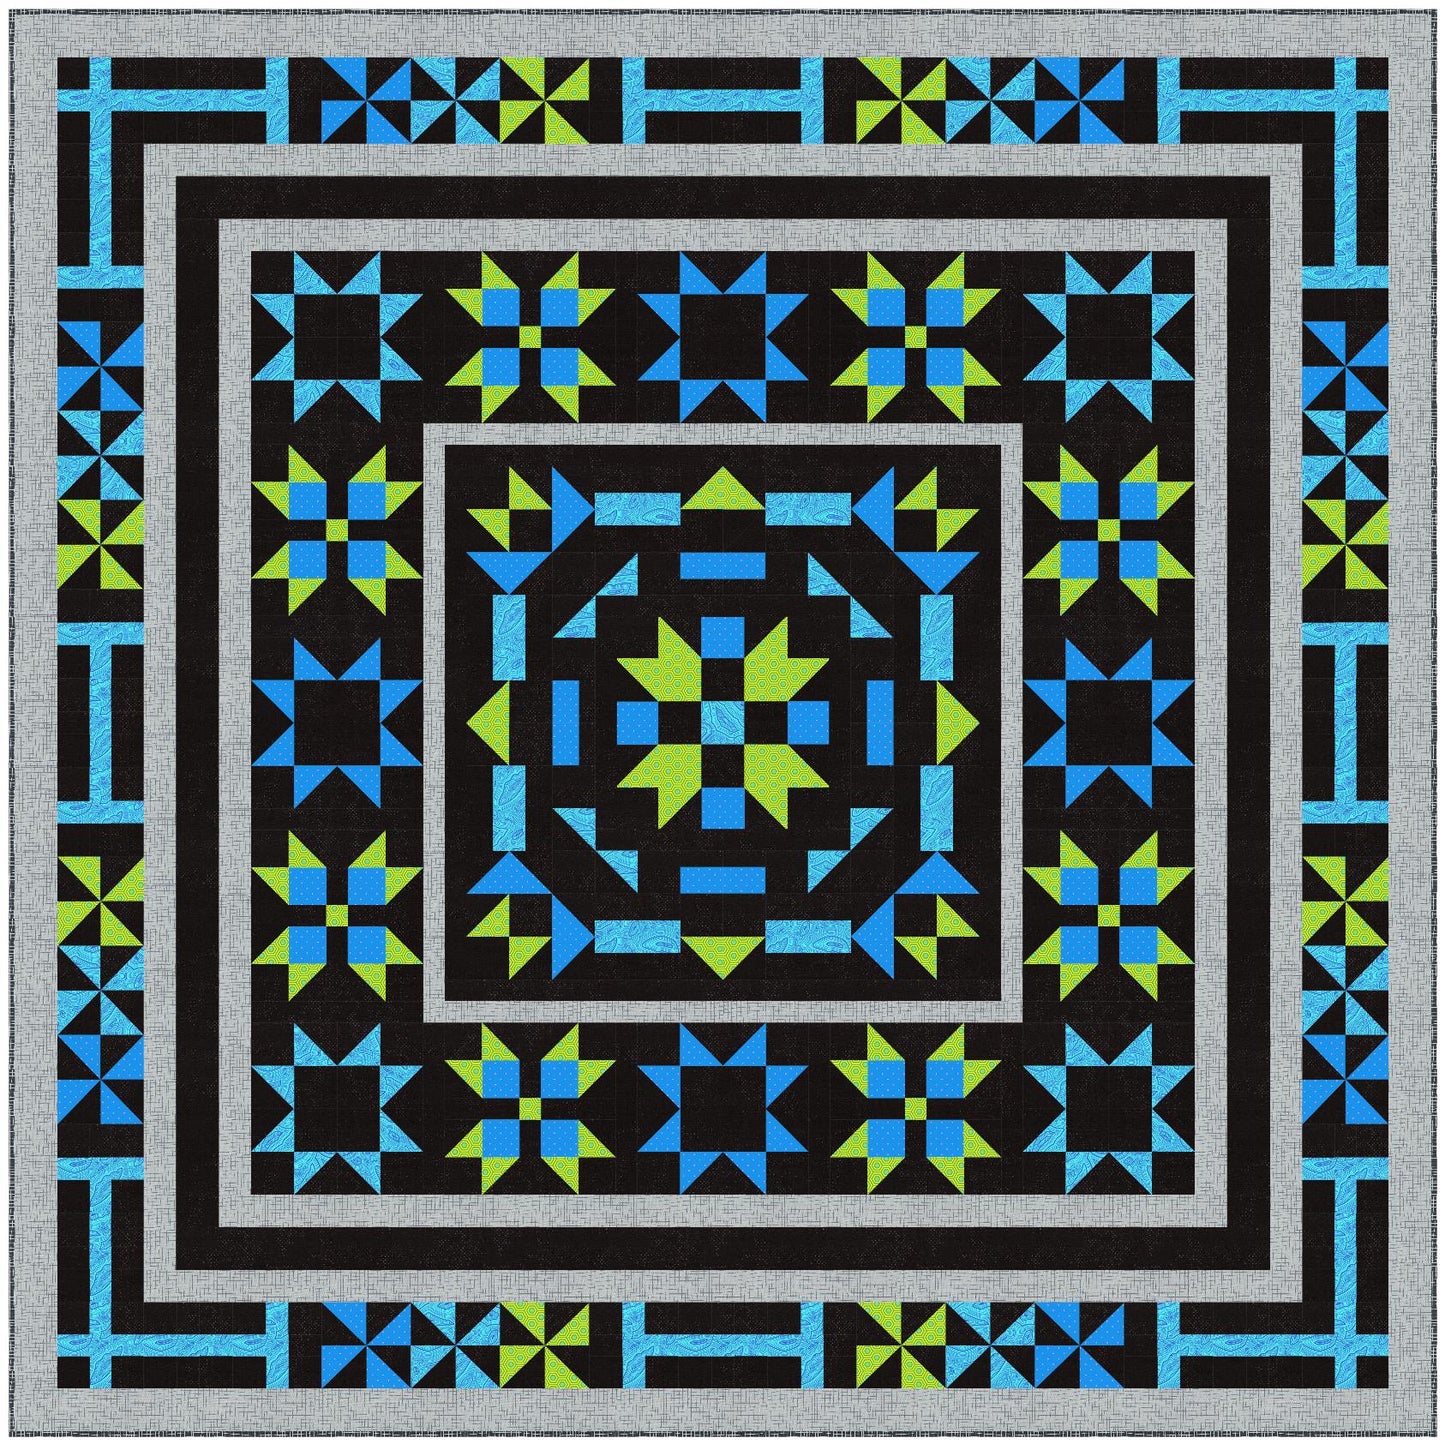 Malted Mystery Quilt - Digital Pattern